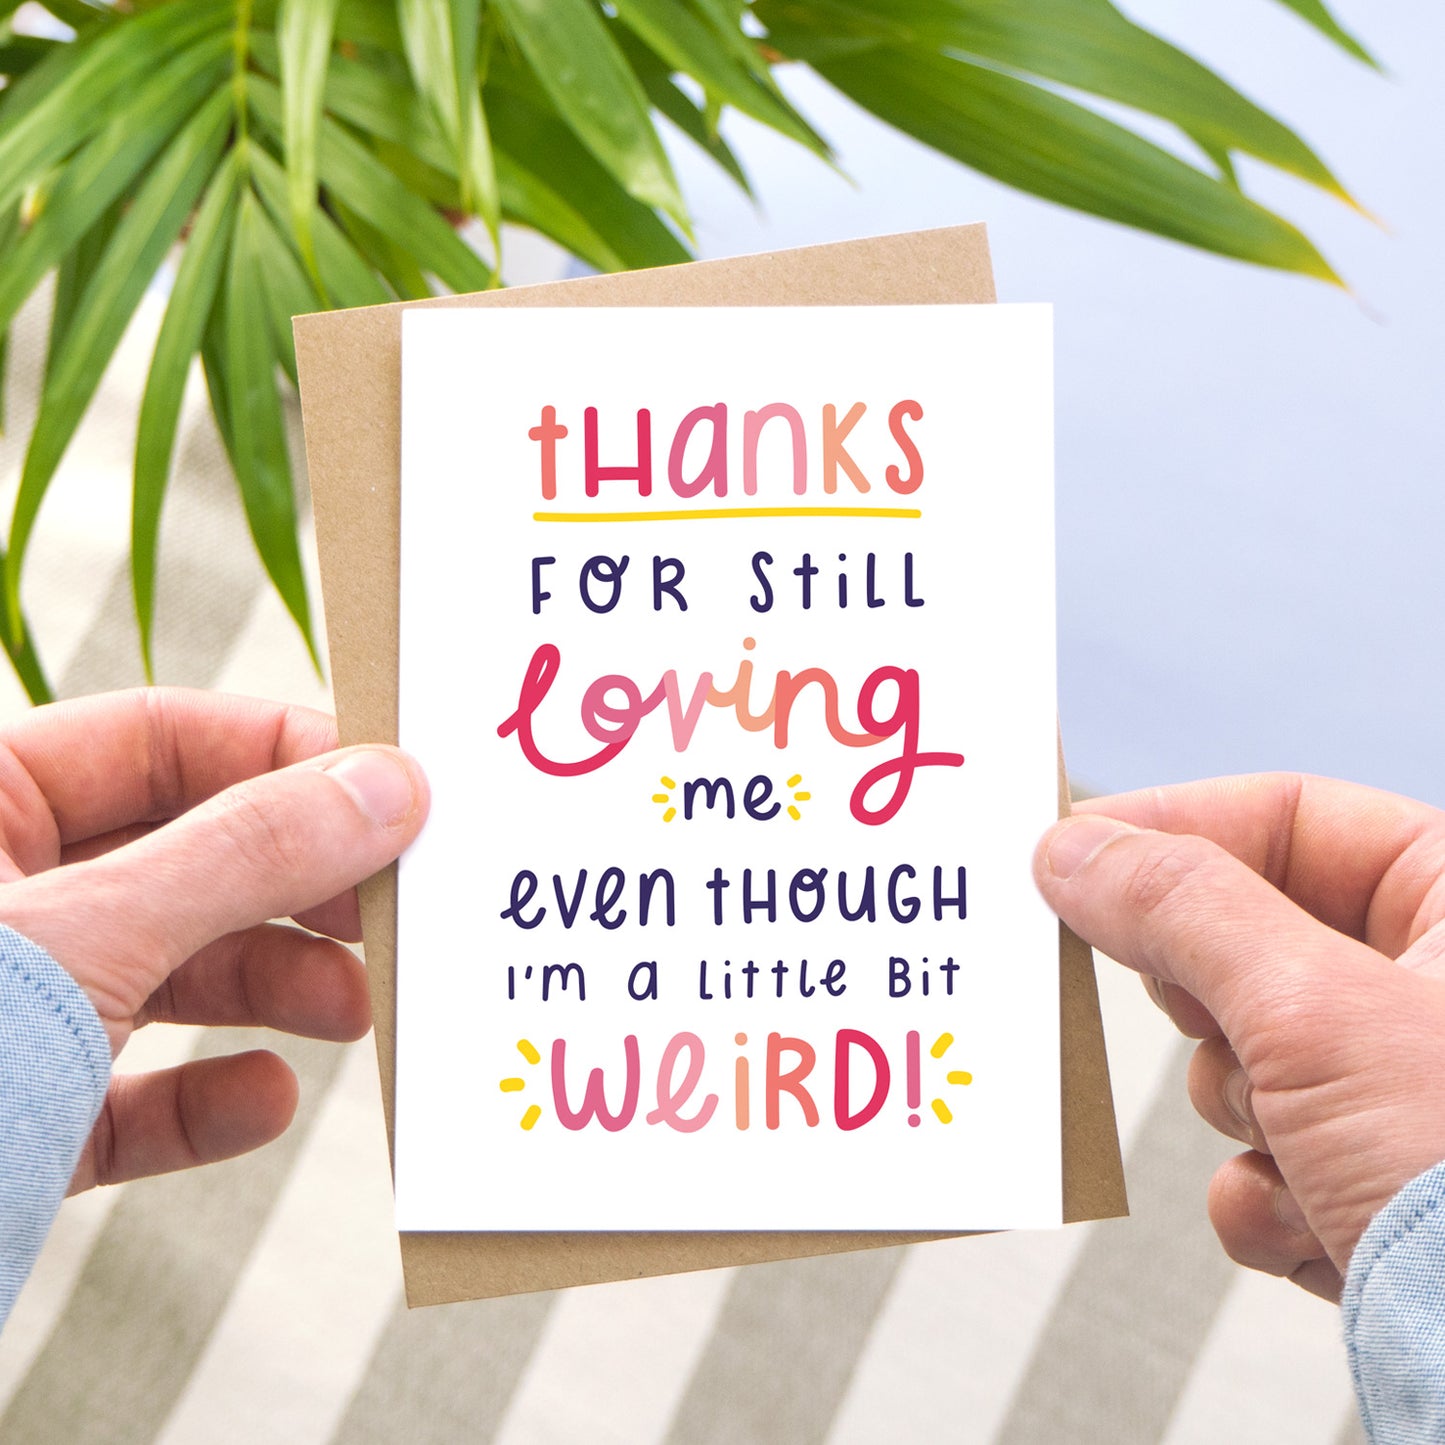 Thanks for still loving me even though I'm a little bit weird card in pink being held over a blue background with a leafy plant.